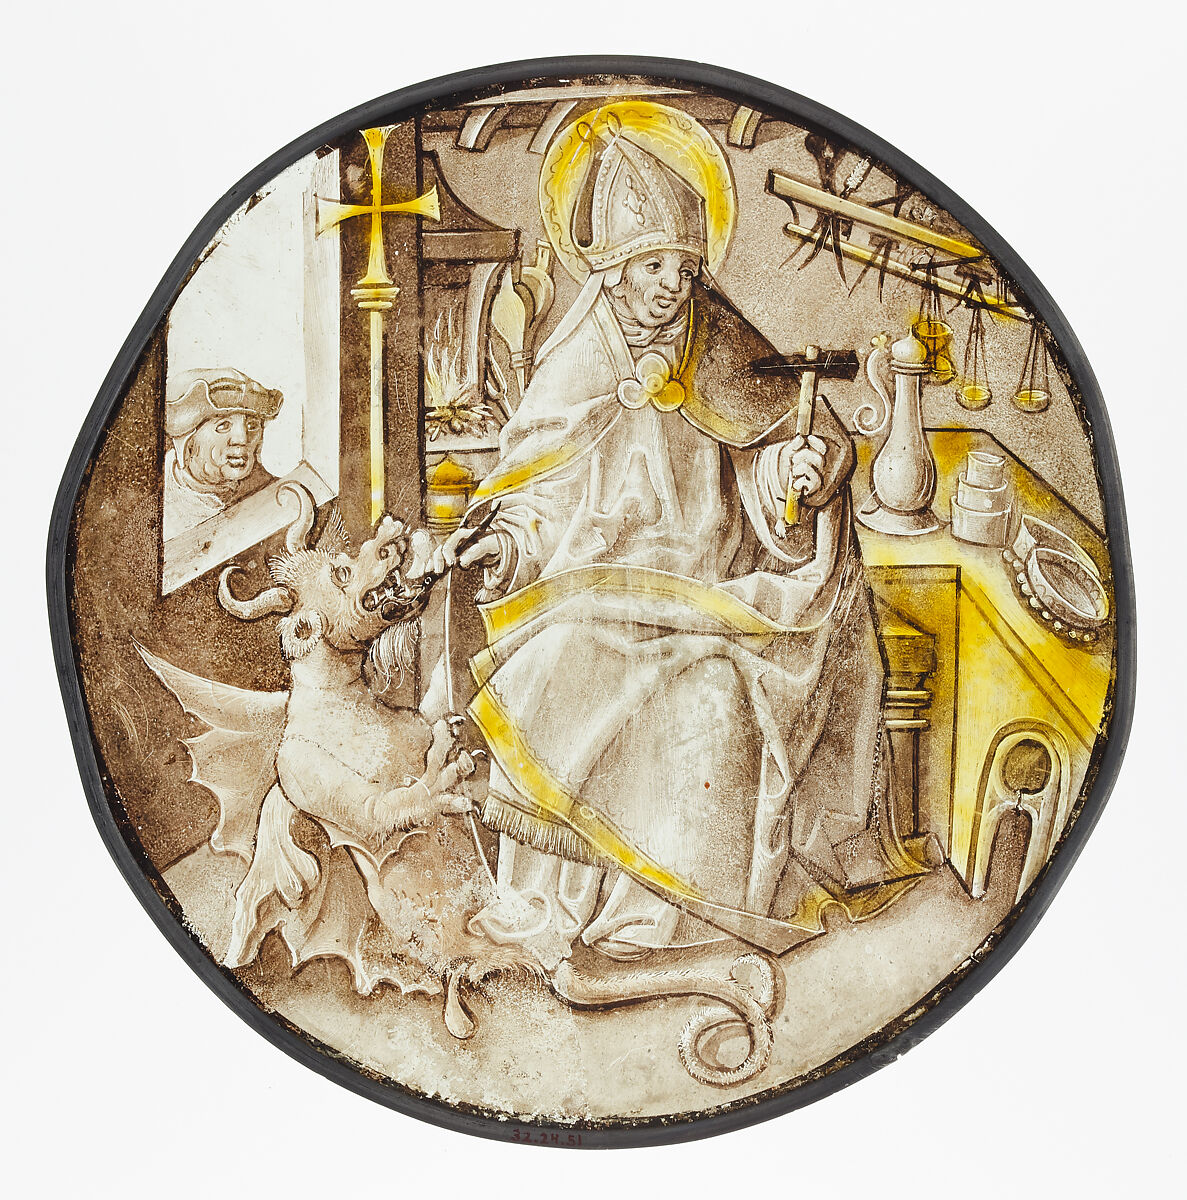 Roundel with Saint Dunstan of Canterbury, Colorless glass, vitreous paint and silver stain, South Netherlandish 